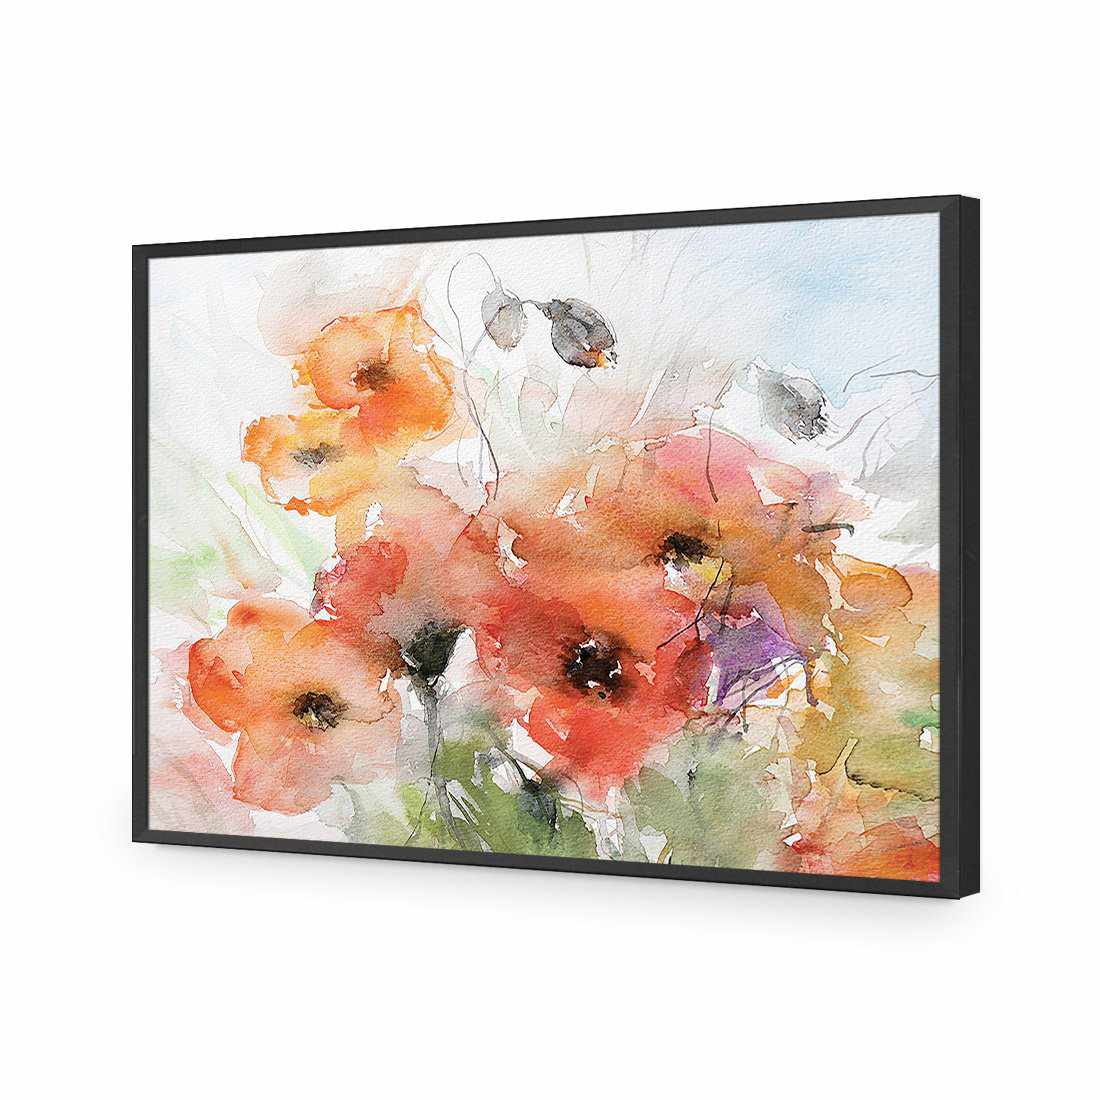 Watercolour Poppies-Acrylic-Wall Art Design-Without Border-Acrylic - Black Frame-45x30cm-Wall Art Designs